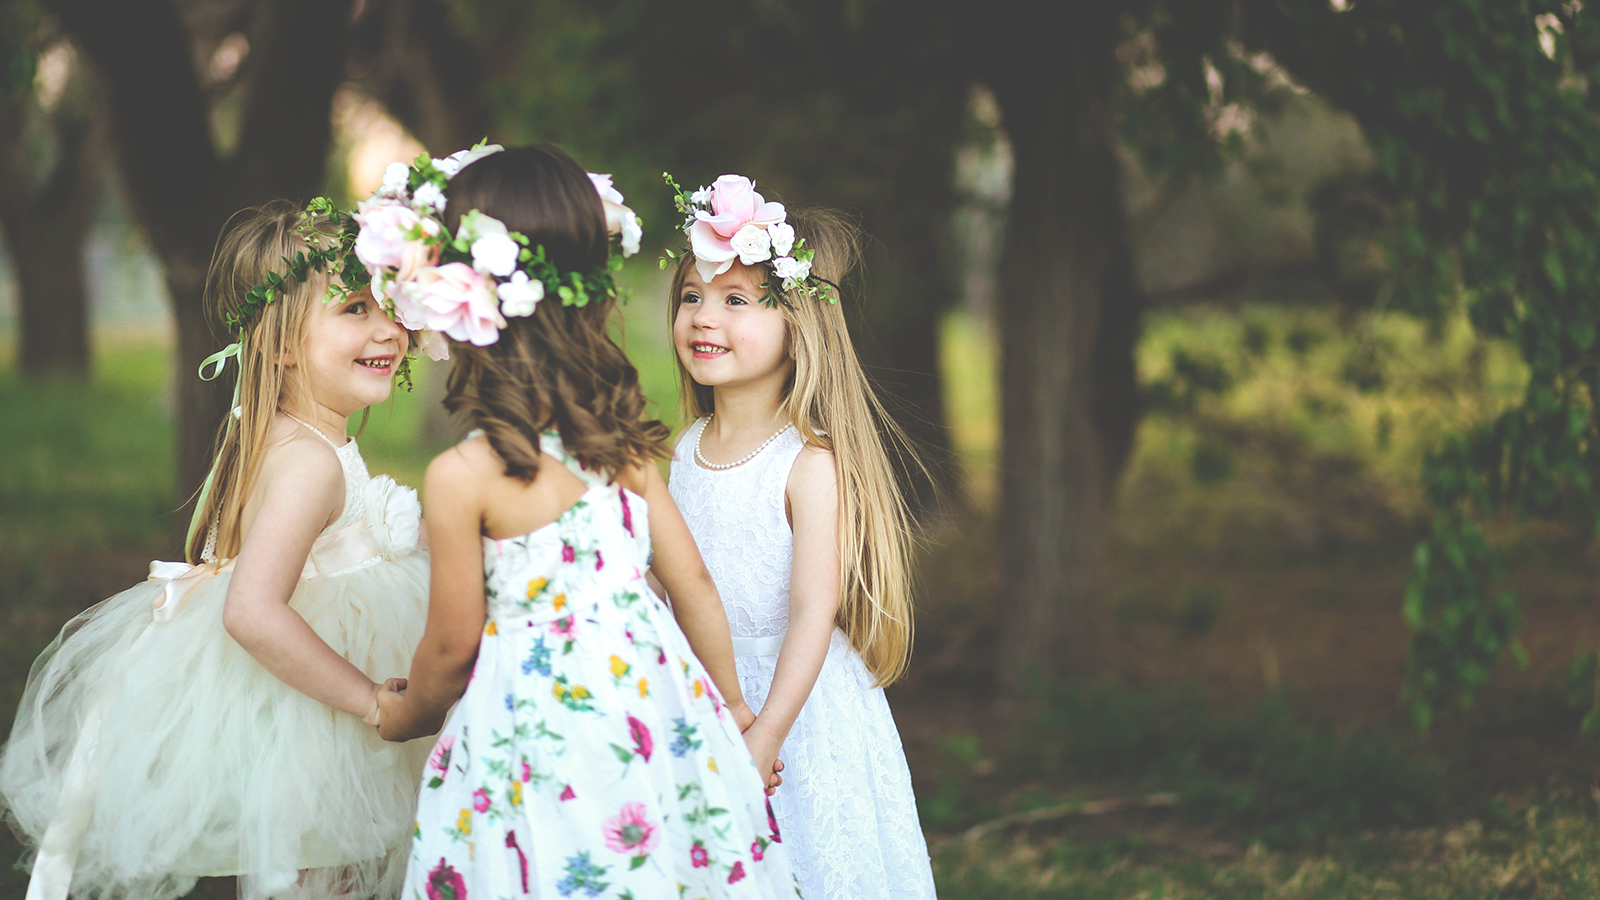 Three adorable spring girls play together in a garden